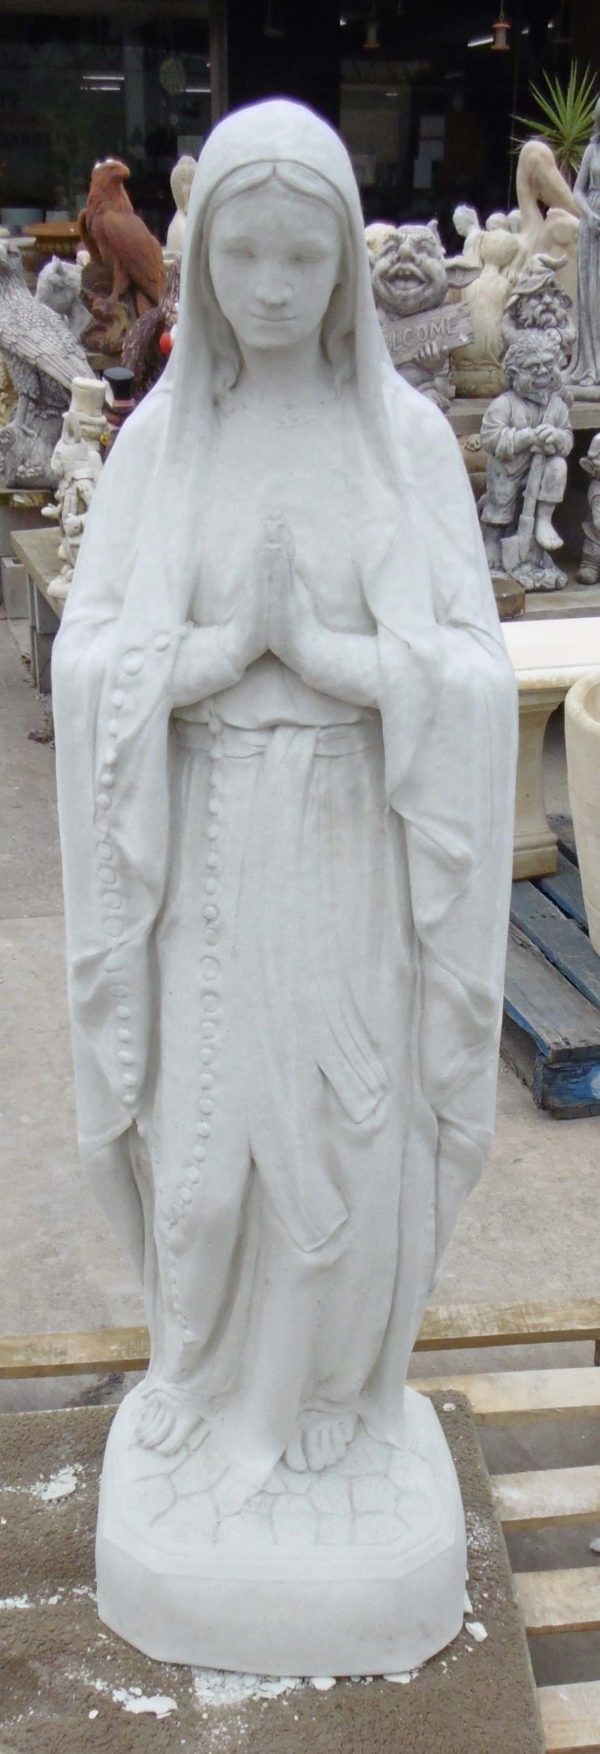 #5 - Mary of Lourdes - Large Concrete statue (white)